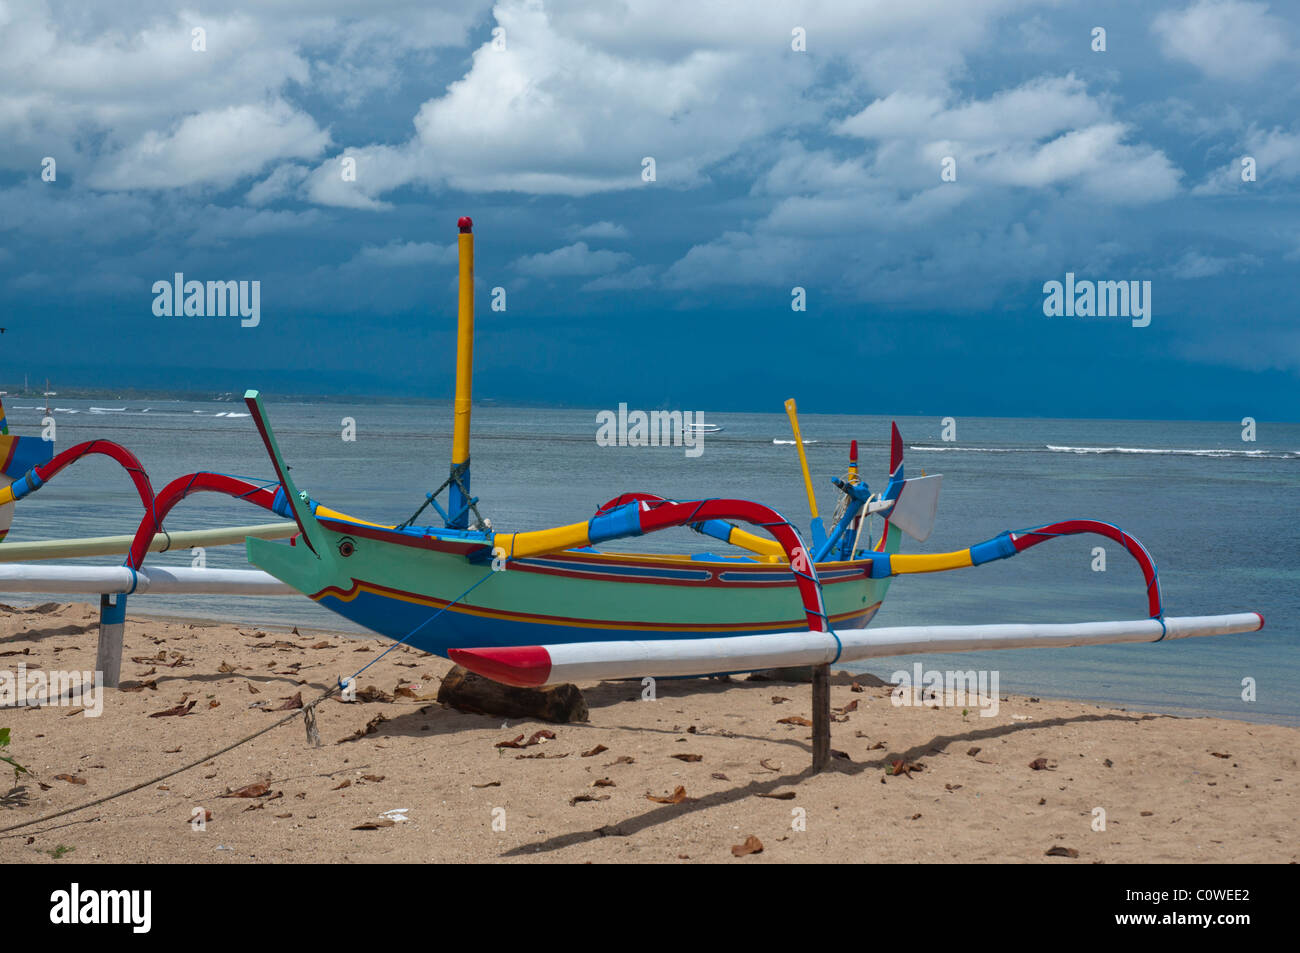 Colorful Balinese fishing boat called jukung in sunlight against a monsoon sky on Sanur Beach, Bali Indonesia  Stock Photo